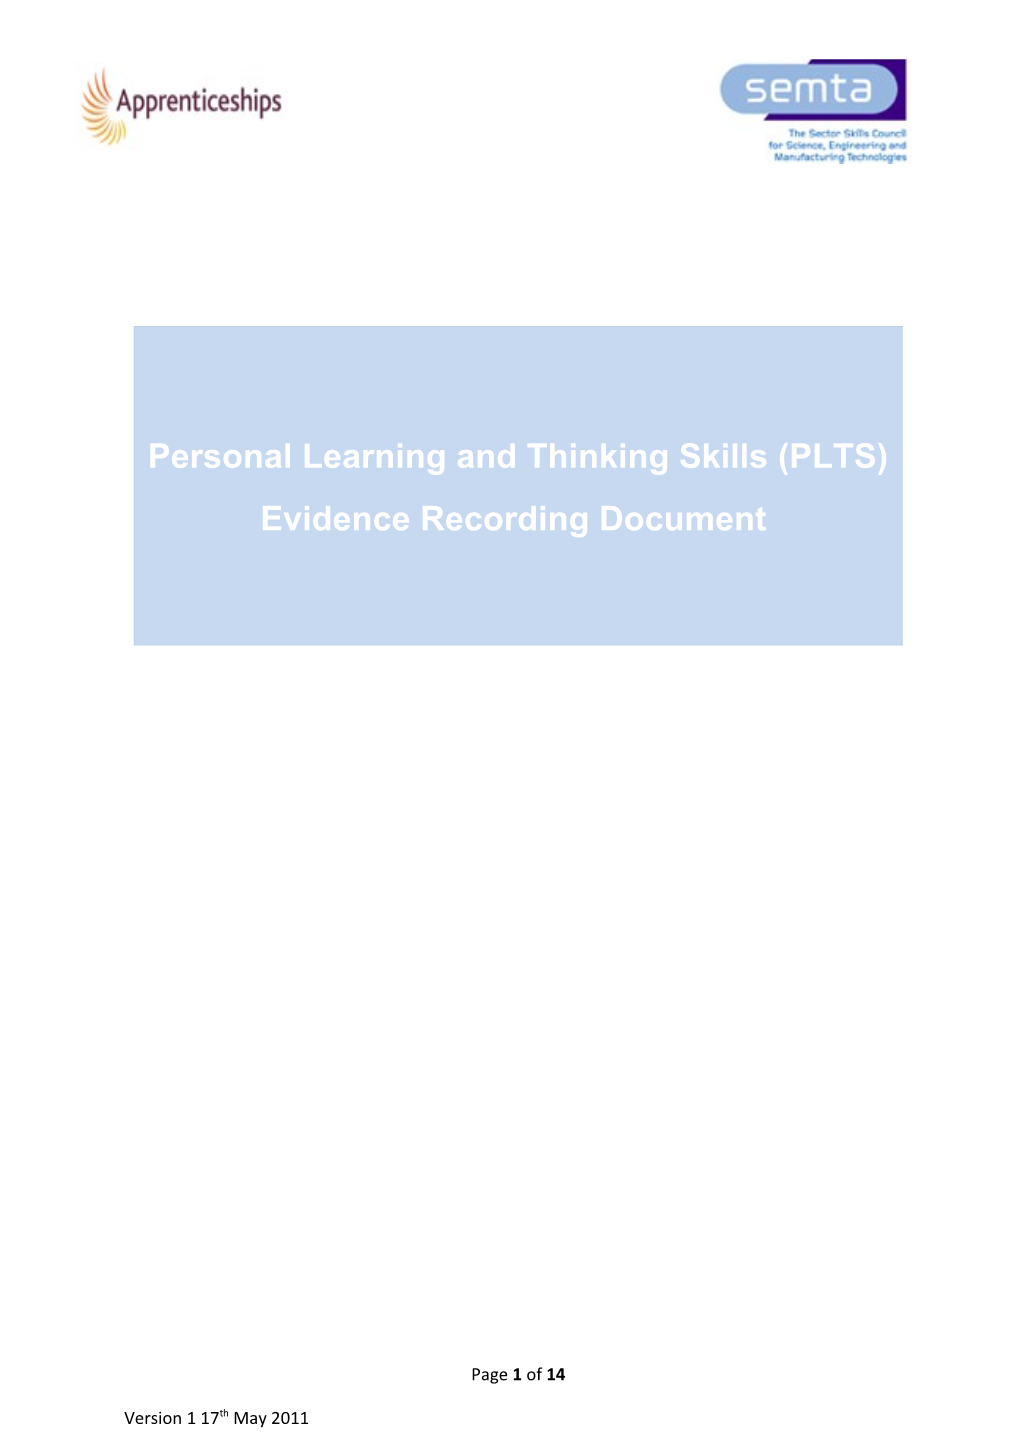 2. Using the PLTS Evidence Recording Document6